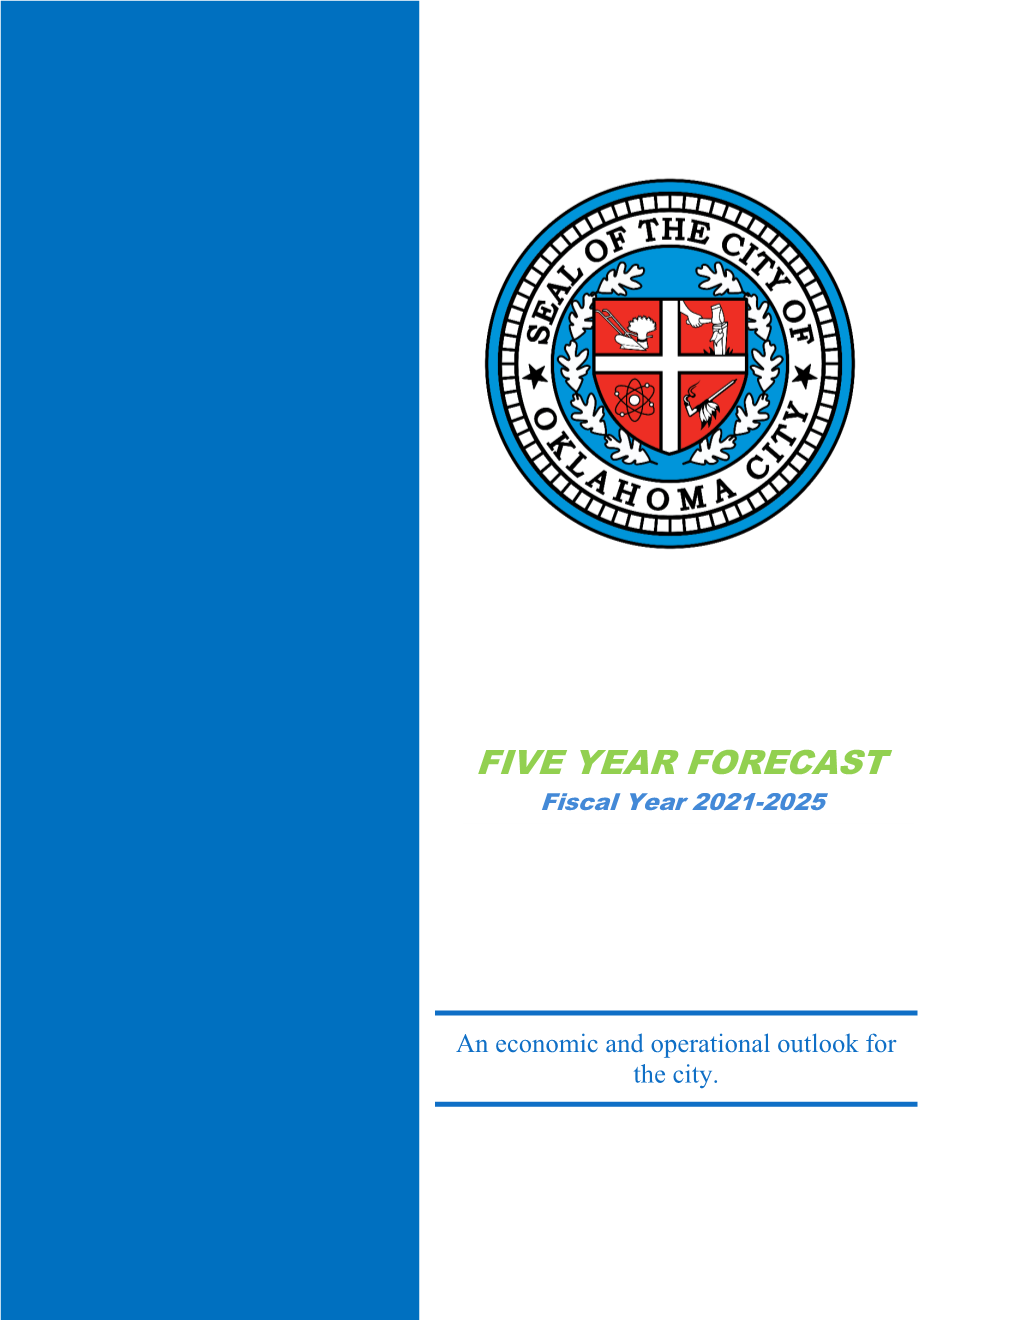 FIVE YEAR FORECAST Fiscal Year 2021-2025